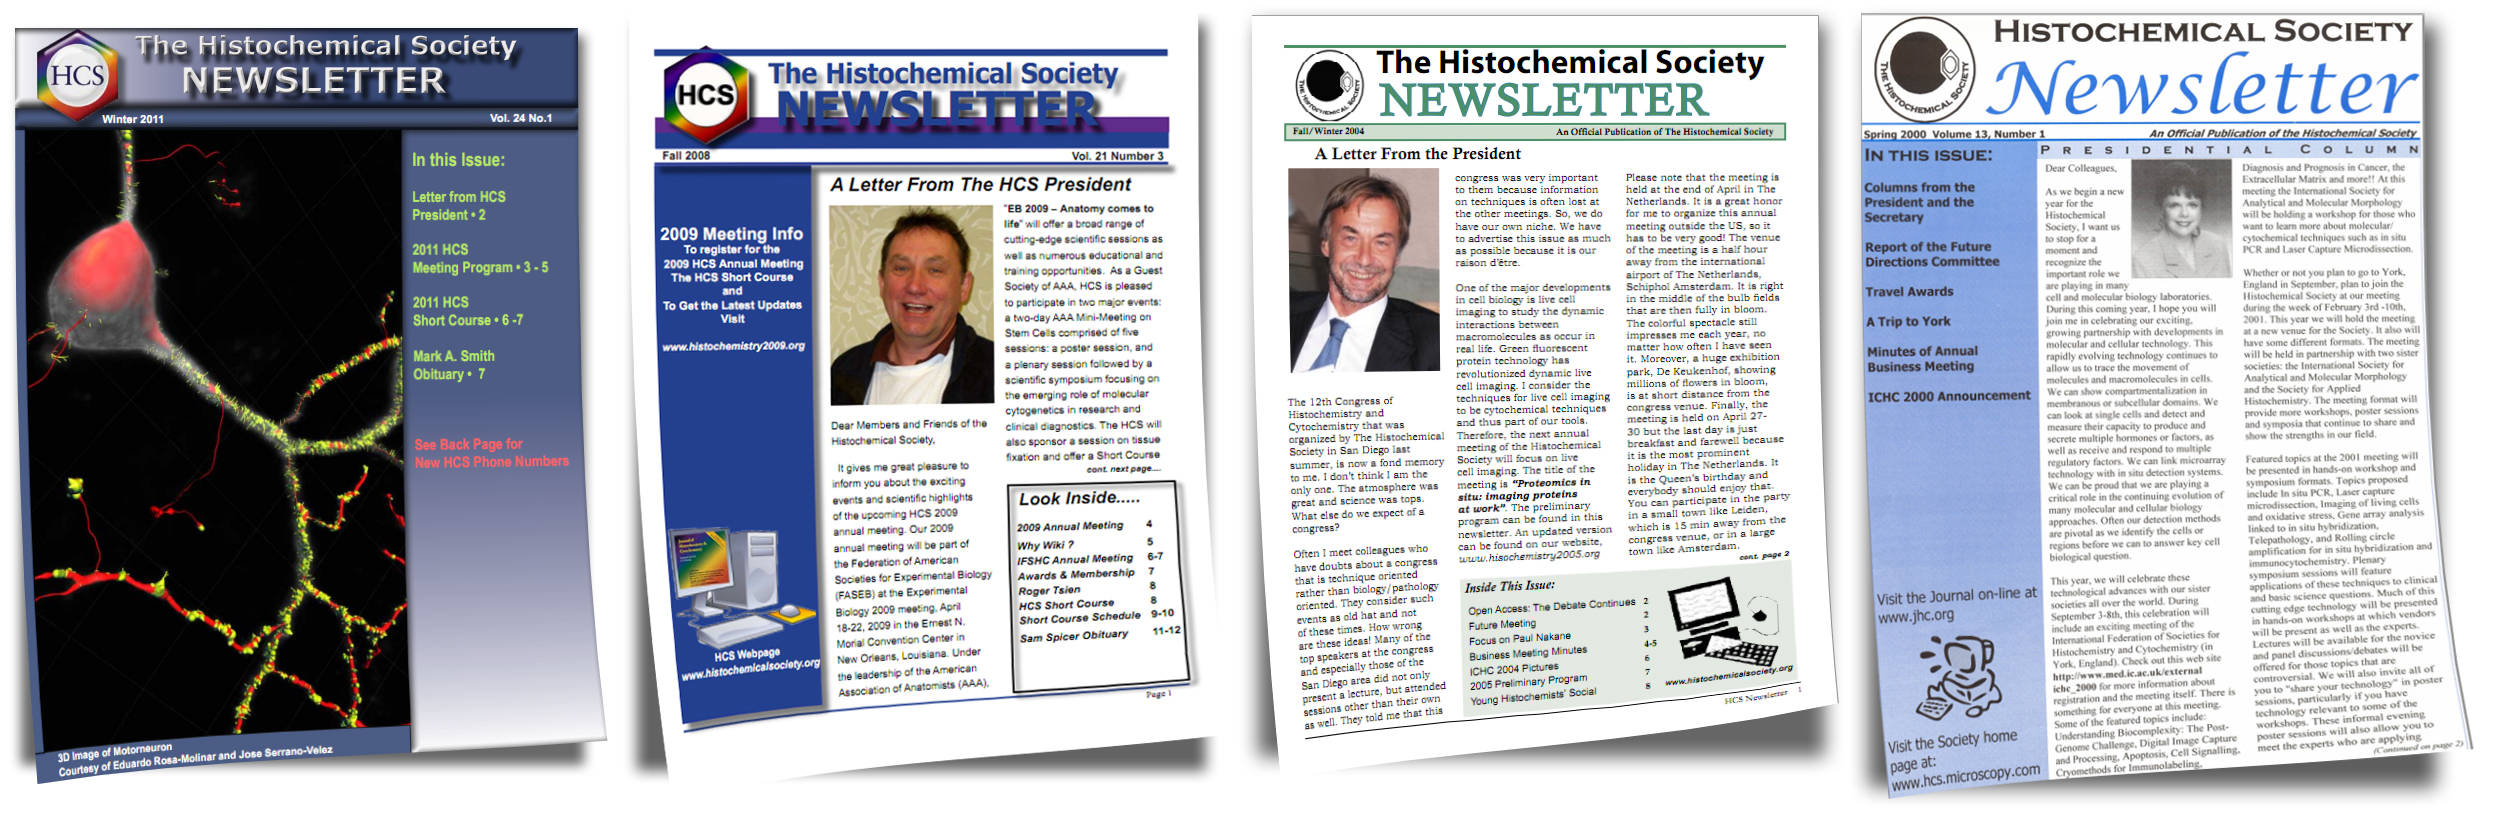 Histochemical Society Newsletters